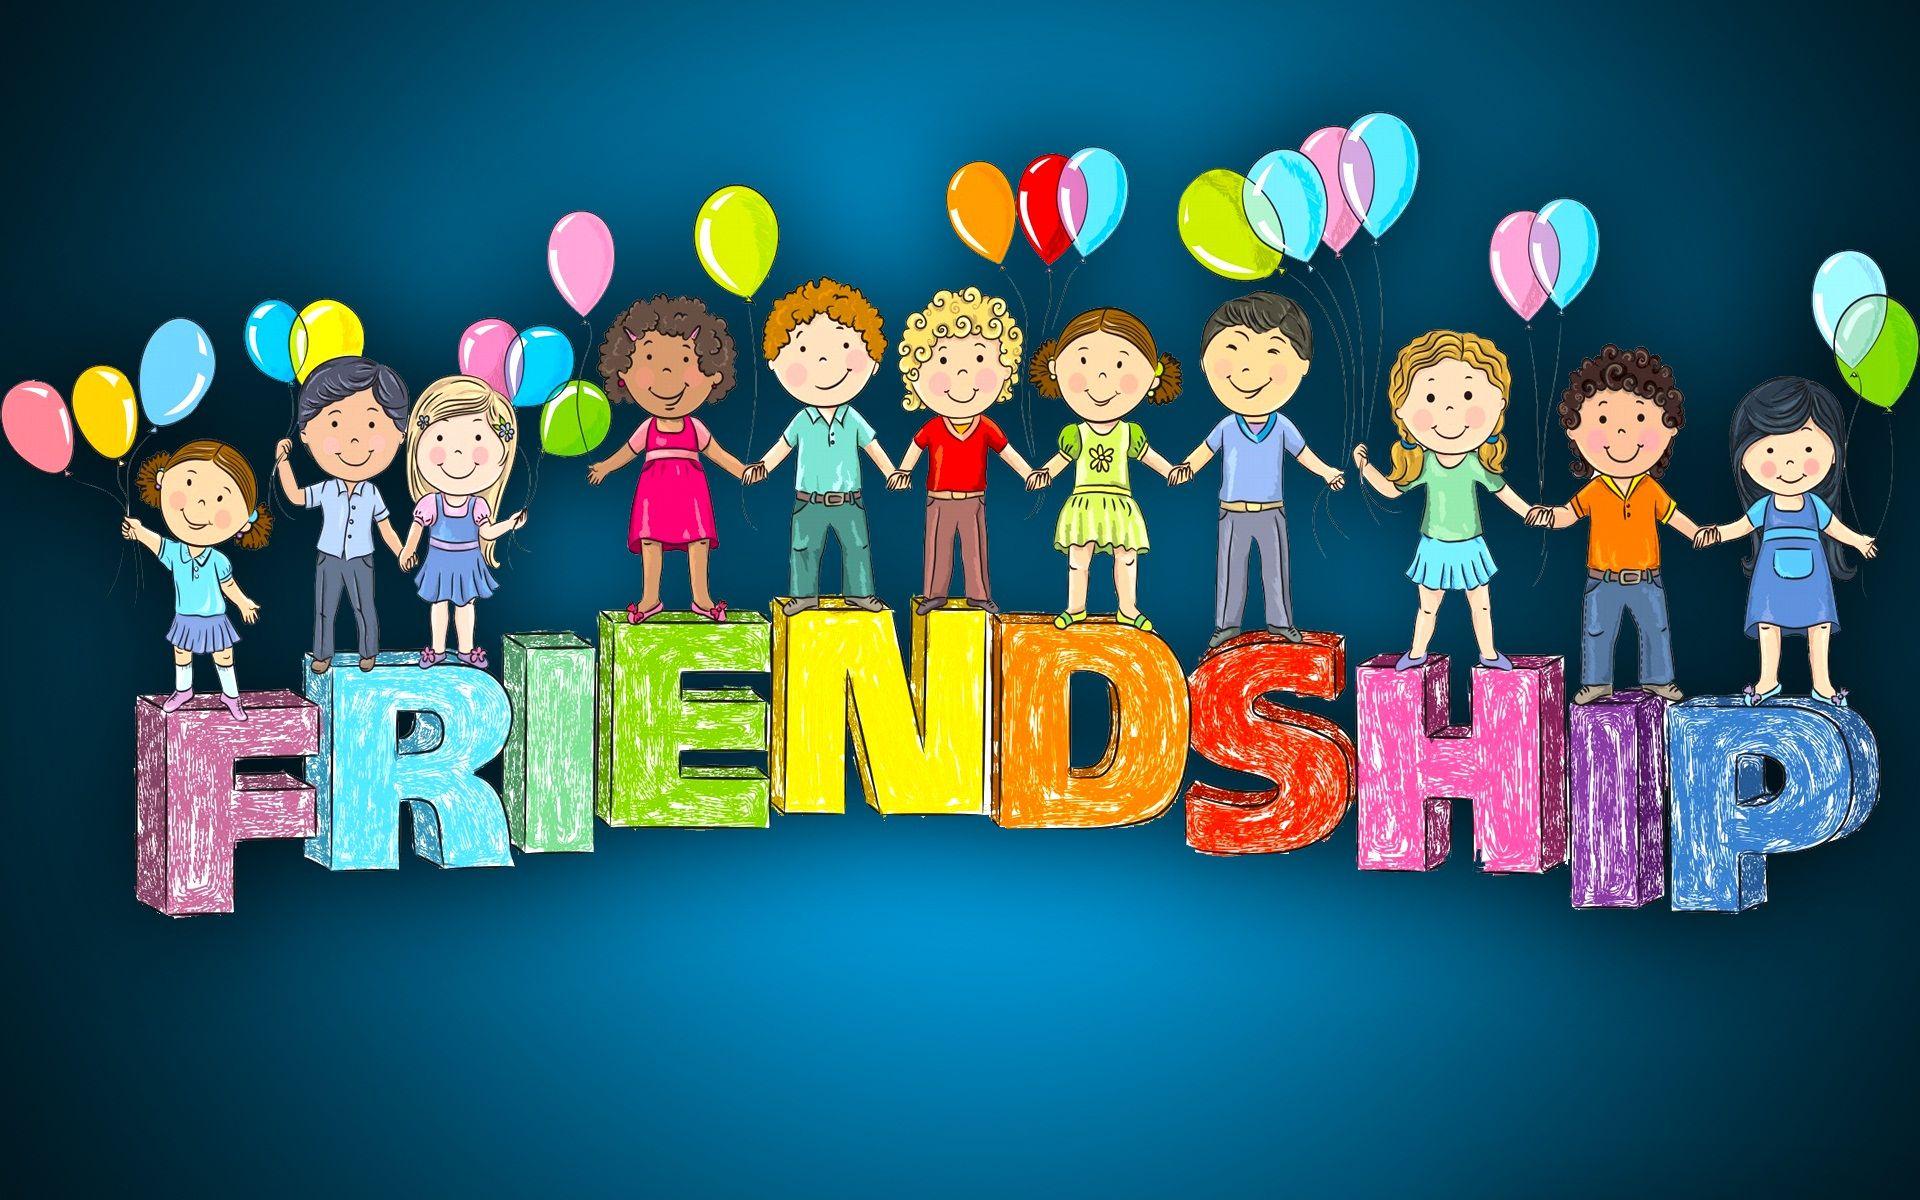 Cartoon guys five best friends student royalty free vector  Friend cartoon  Best friends cartoon Friendship pictures